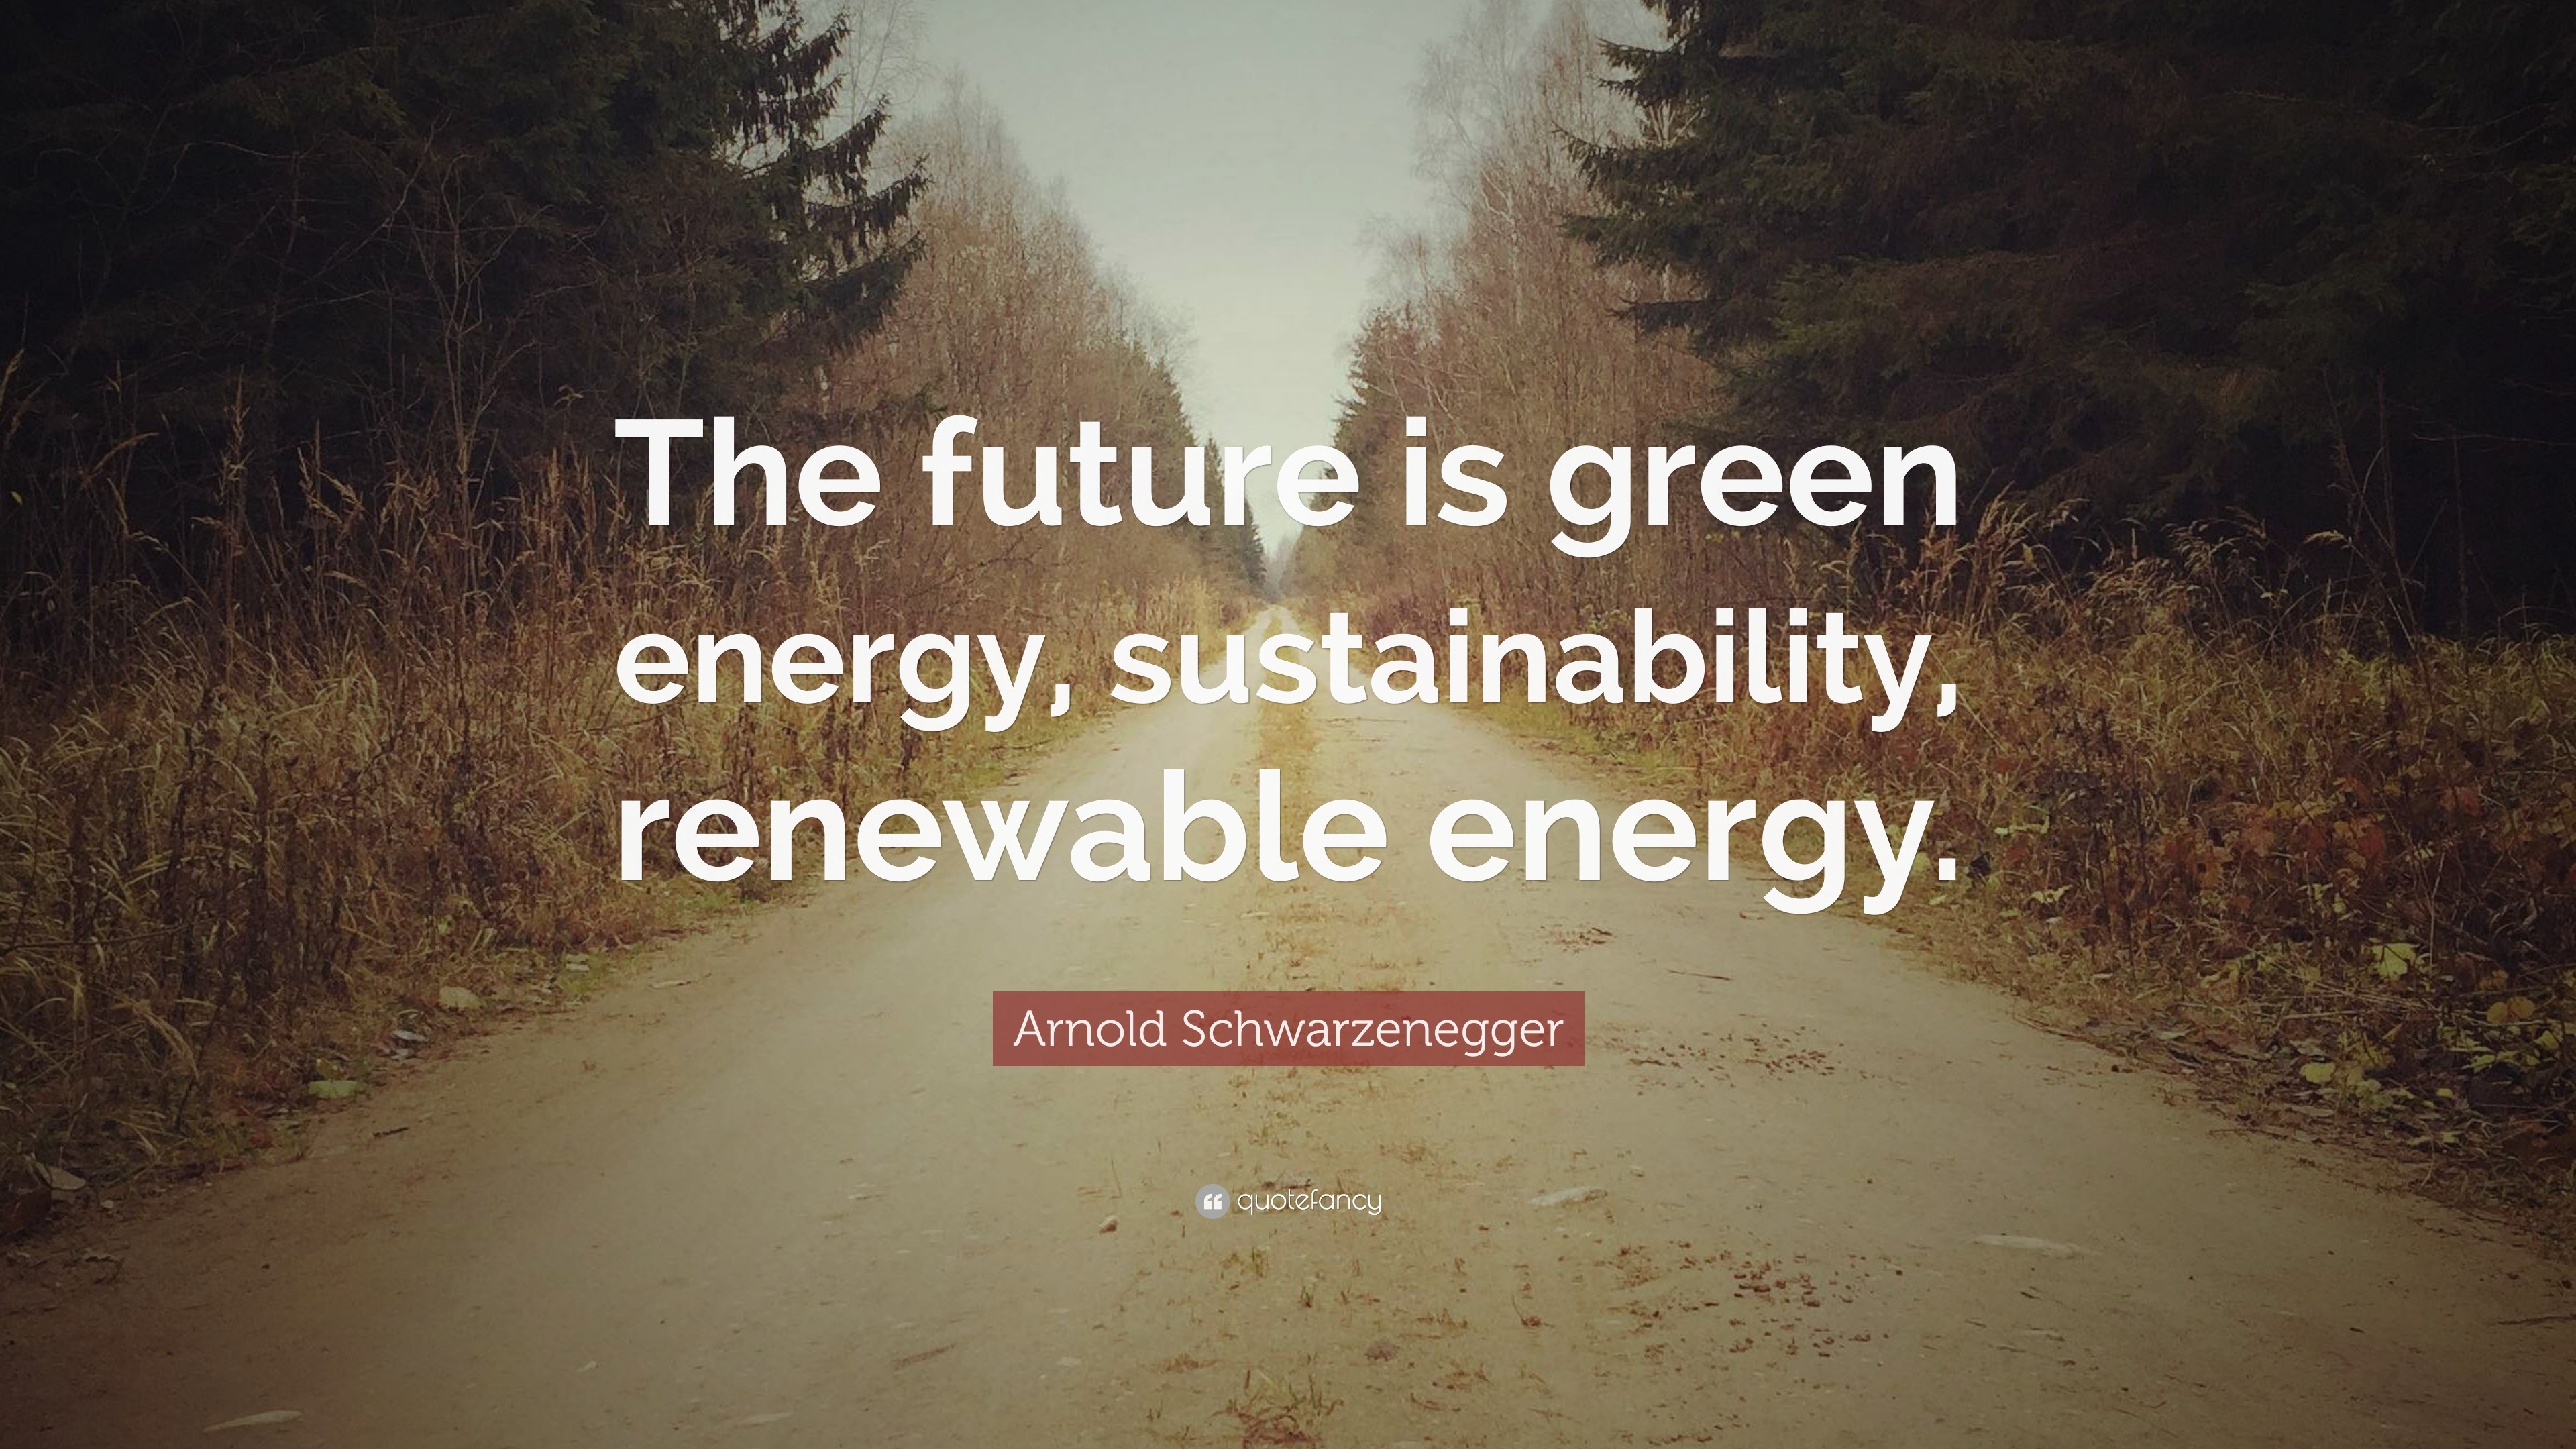 Arnold Schwarzenegger Quote “The future is green energy